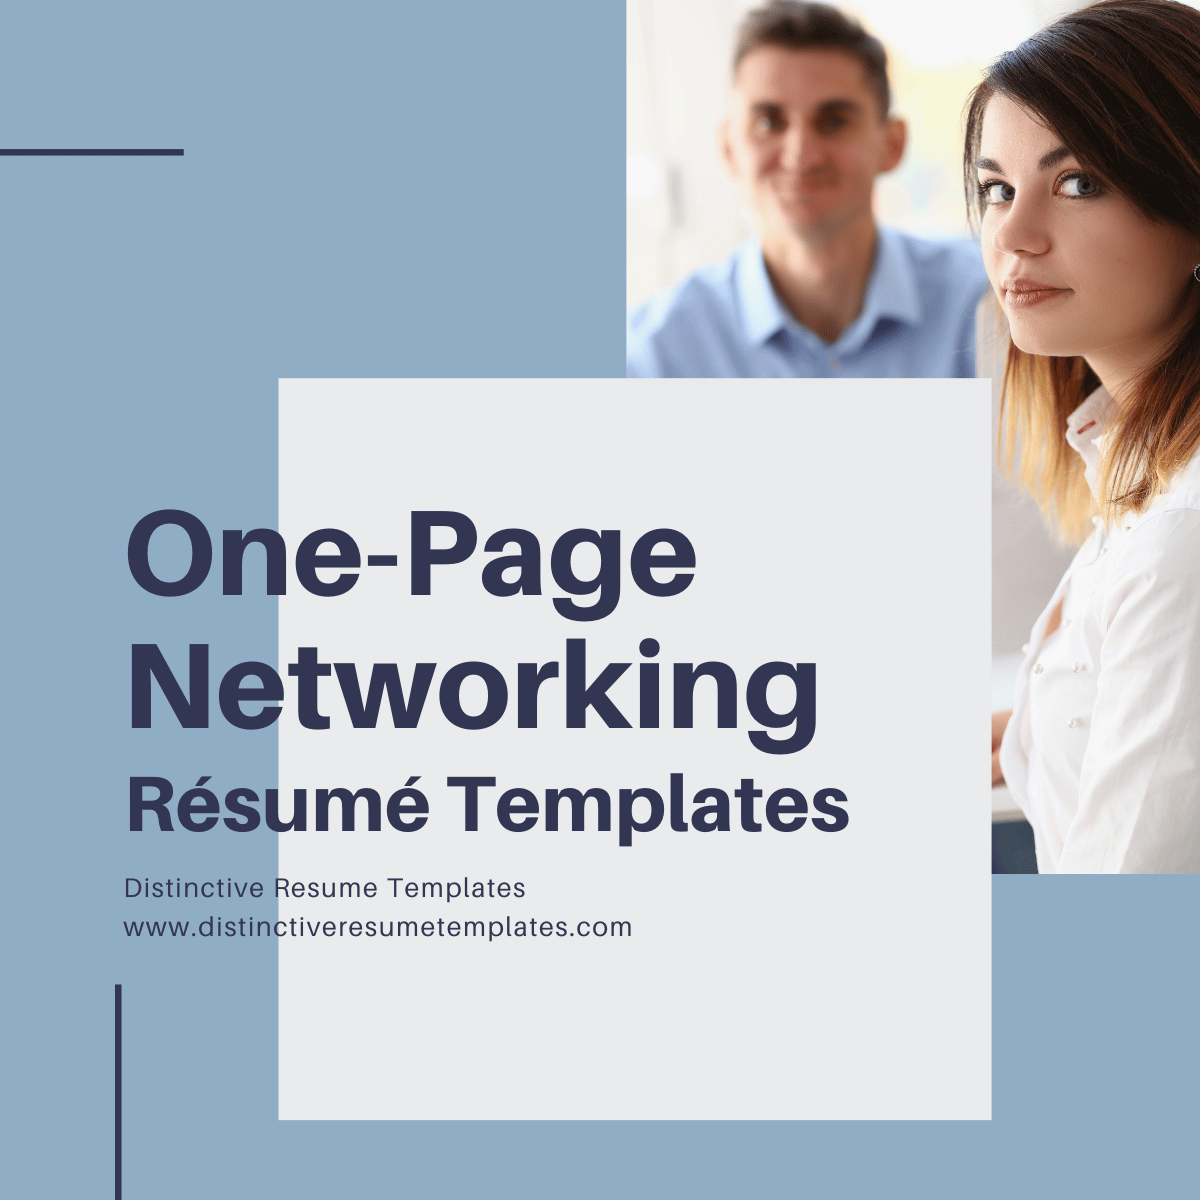 One page resume templates